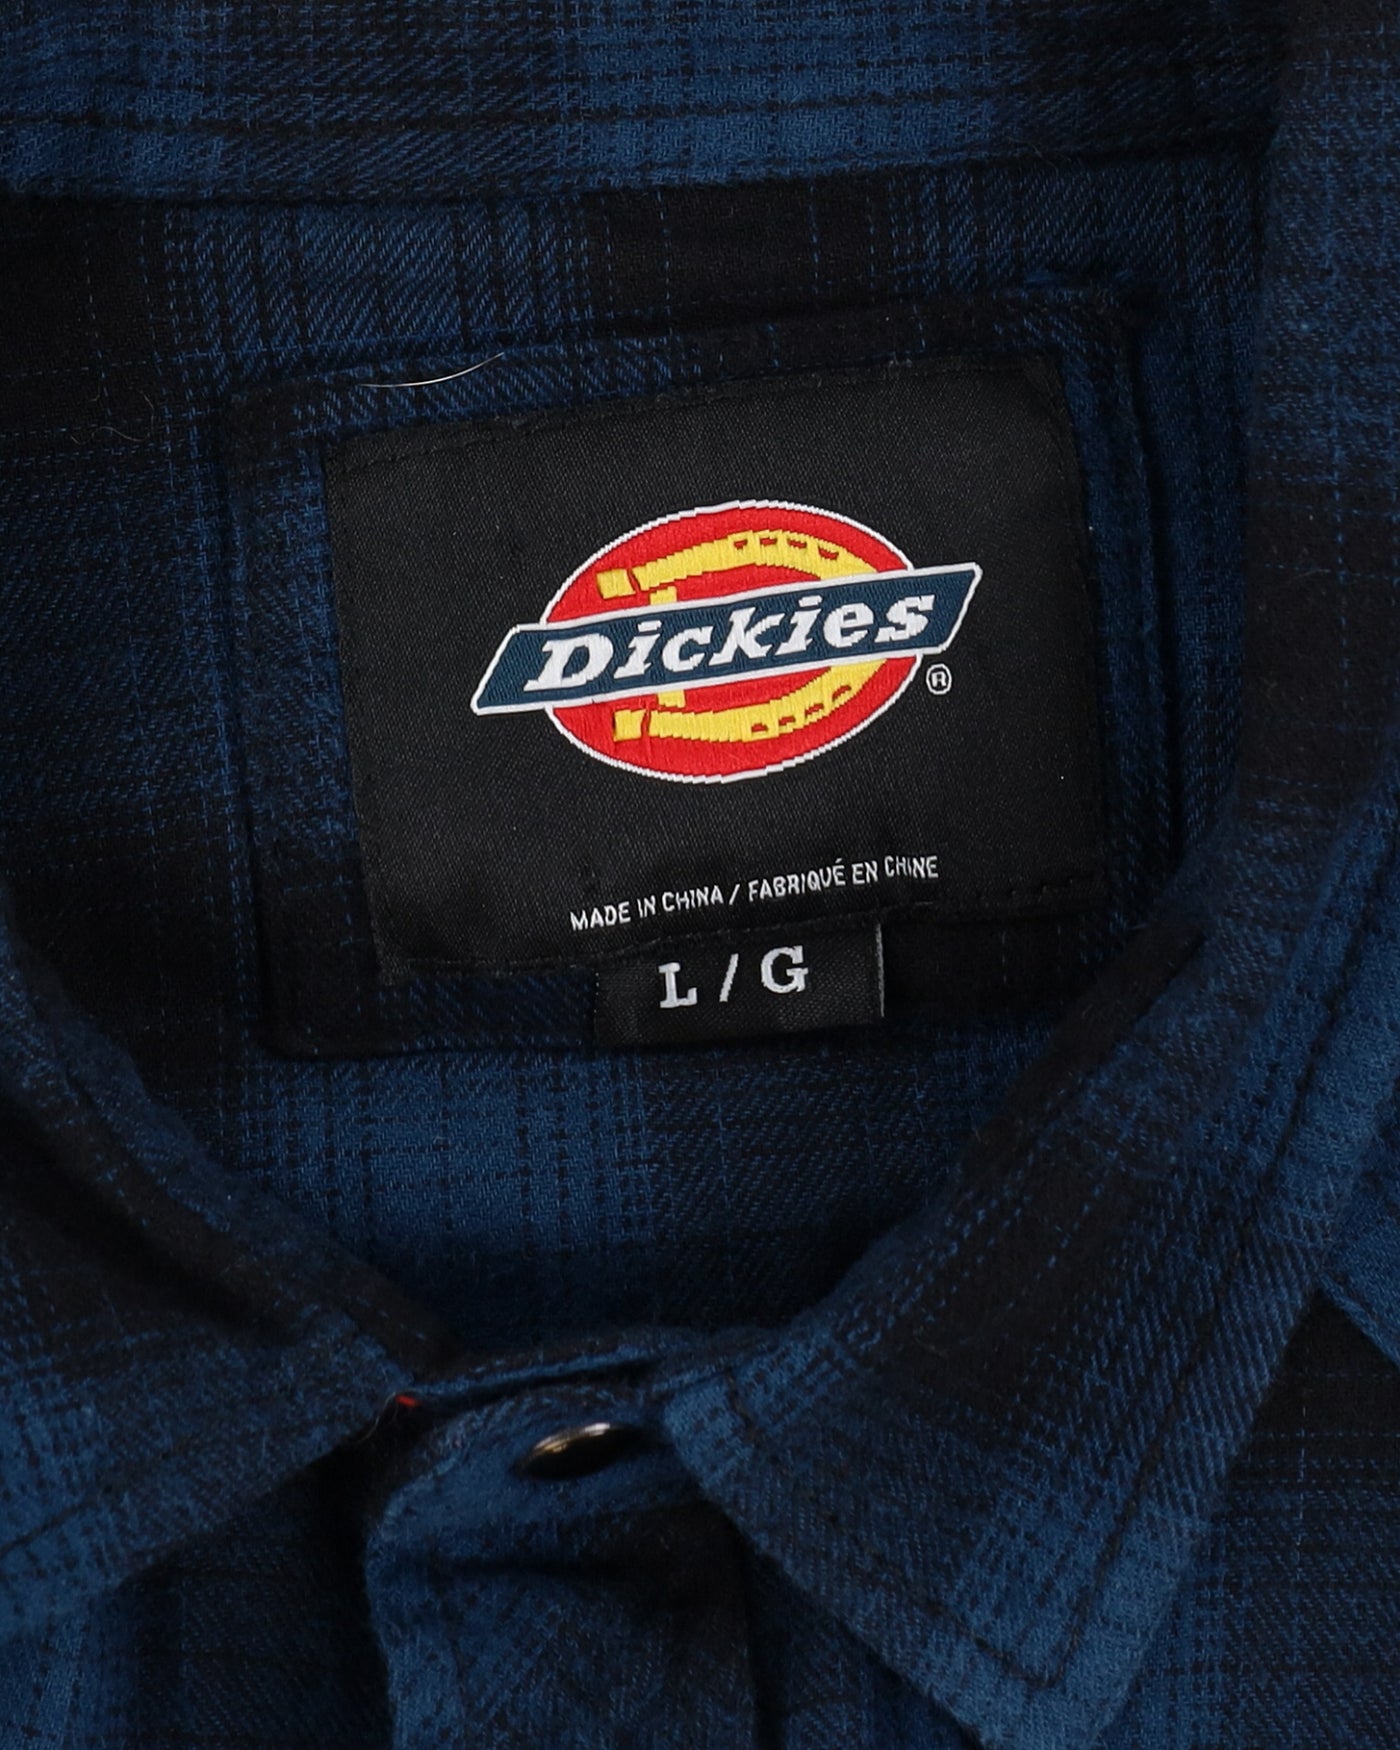 Dickies Blue And Black Checked Flannel Shirt - M / L